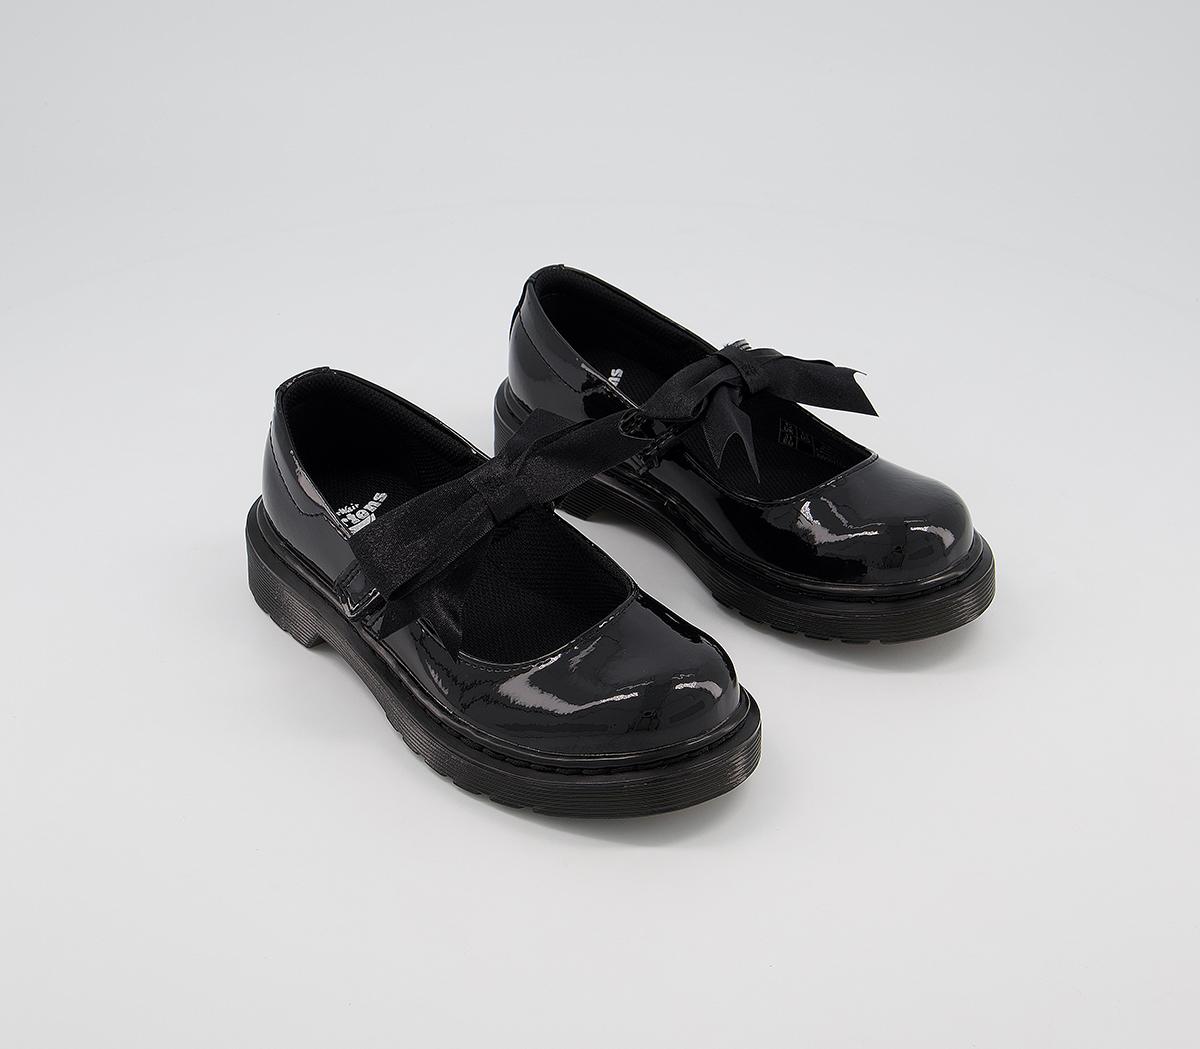 dr. martens kids maccy ii bow mary jane jnr black patent leather, 11 youth